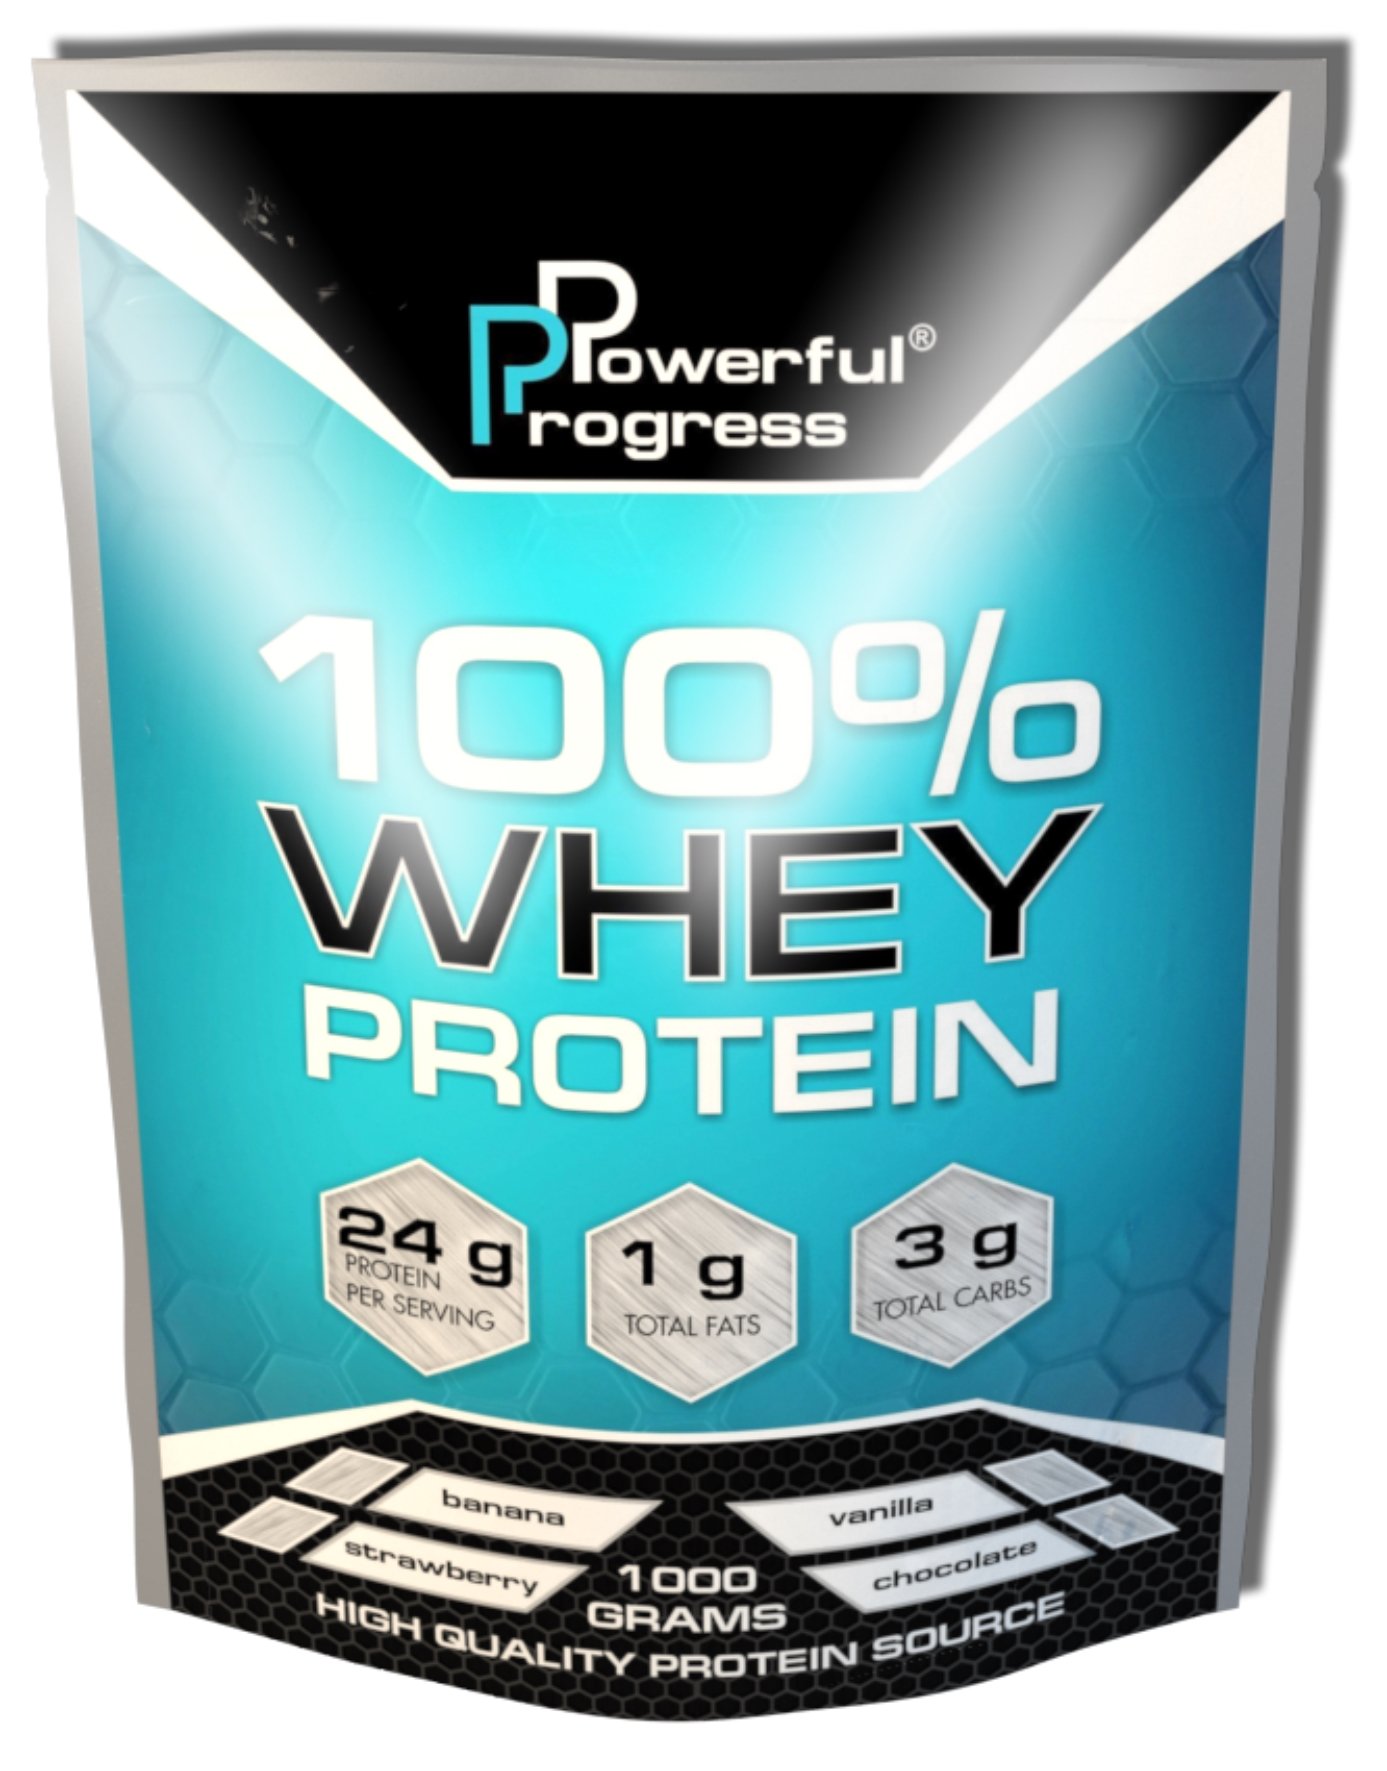 100% Whey Protein, 1000 g, Powerful Progress. Whey Protein. recovery Anti-catabolic properties Lean muscle mass 